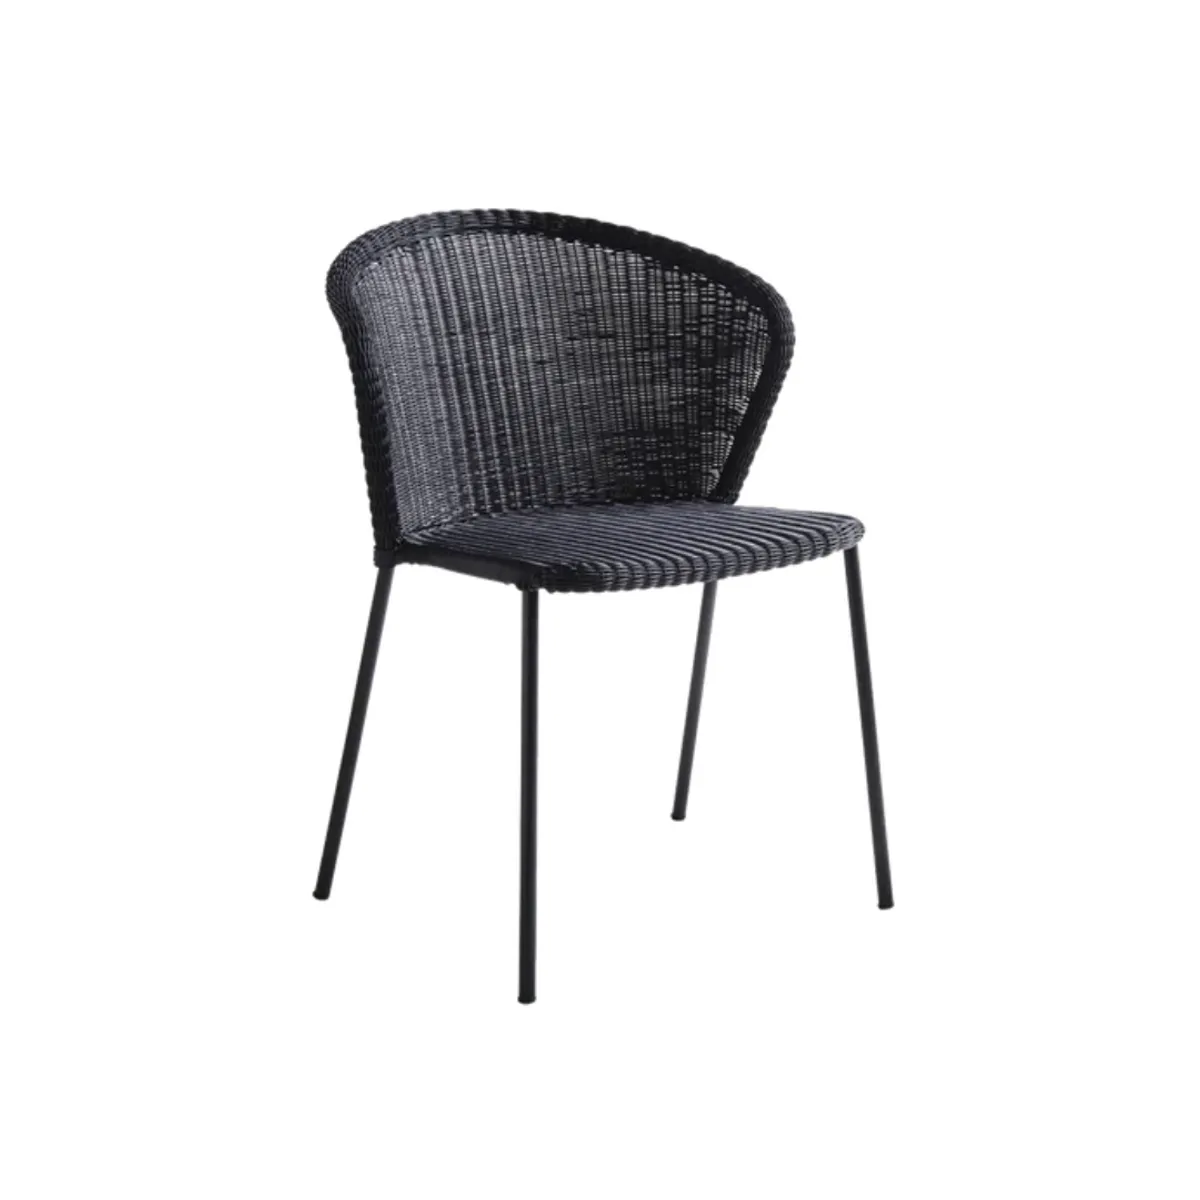 Tropez stacking chair 1